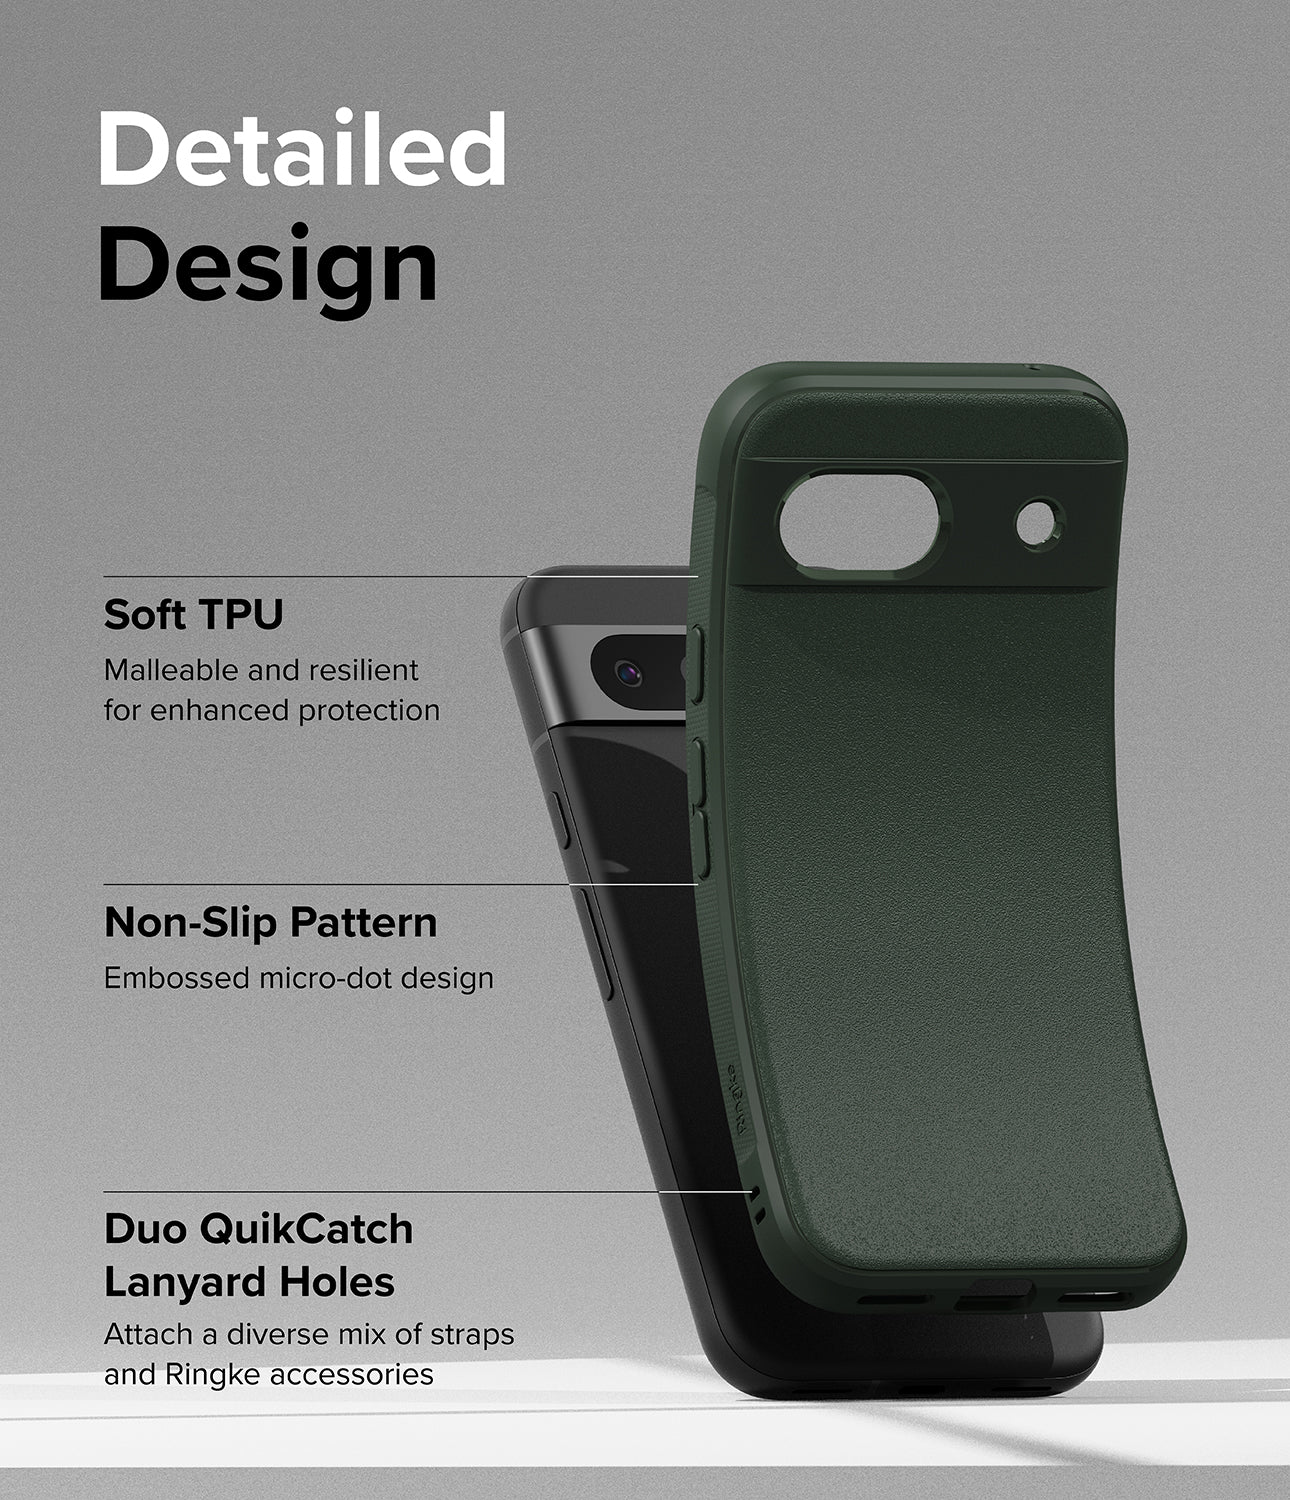 Google Pixel 8a Case | Onyx - Dark Green - Detailed Design. Malleable and resilient for enhanced protection with Soft TPU. Embossed micro-dot design. Non-Slip Pattern. Attach a diverse mix of straps and Ringke accessories with Duo QuikCatch Lanyard Holes.